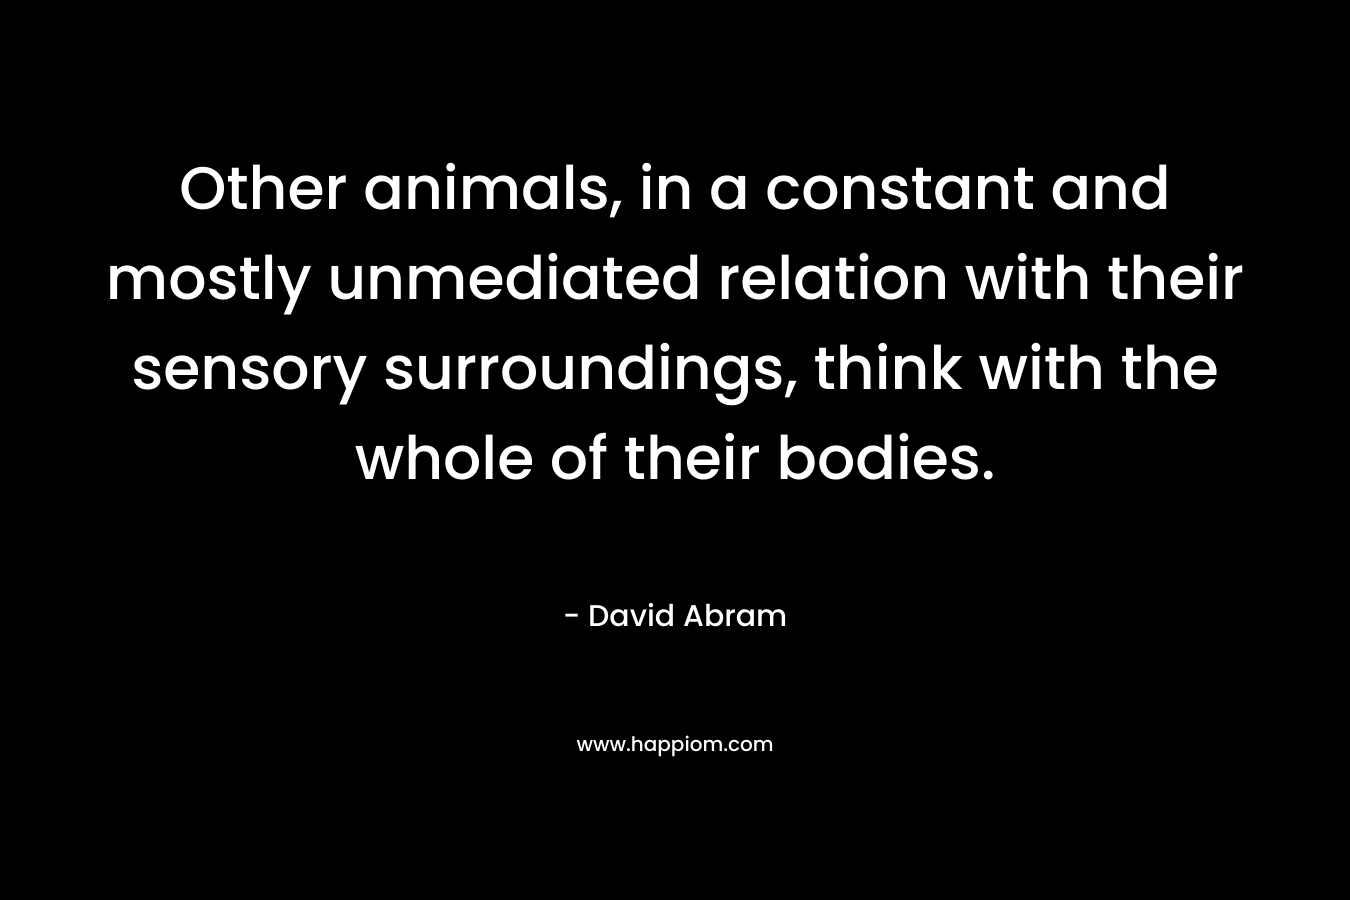 Other animals, in a constant and mostly unmediated relation with their sensory surroundings, think with the whole of their bodies. – David Abram